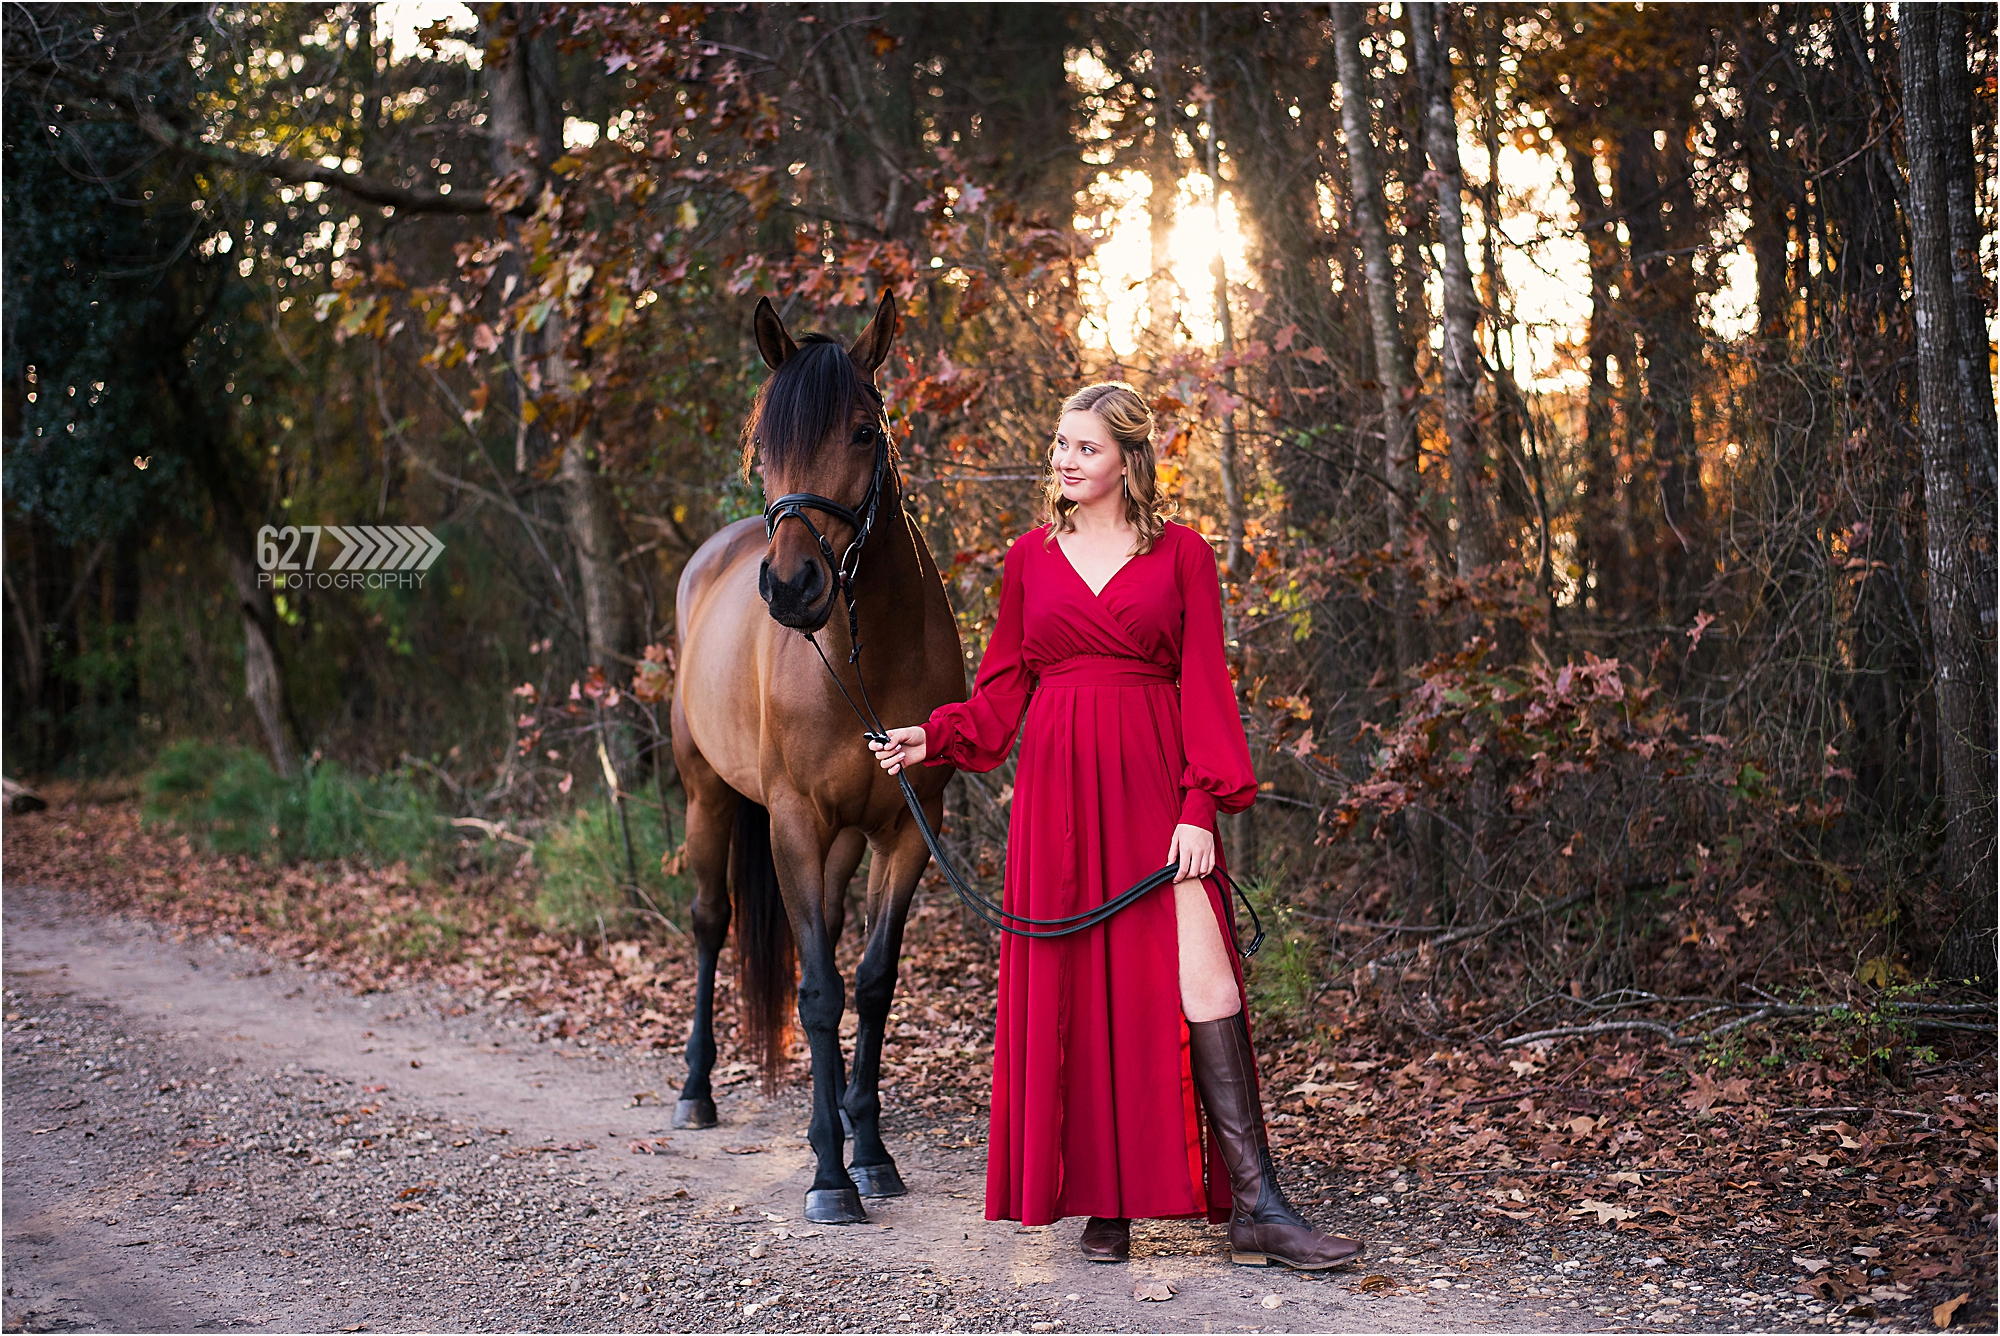 Senior Pictures Girl with her horse